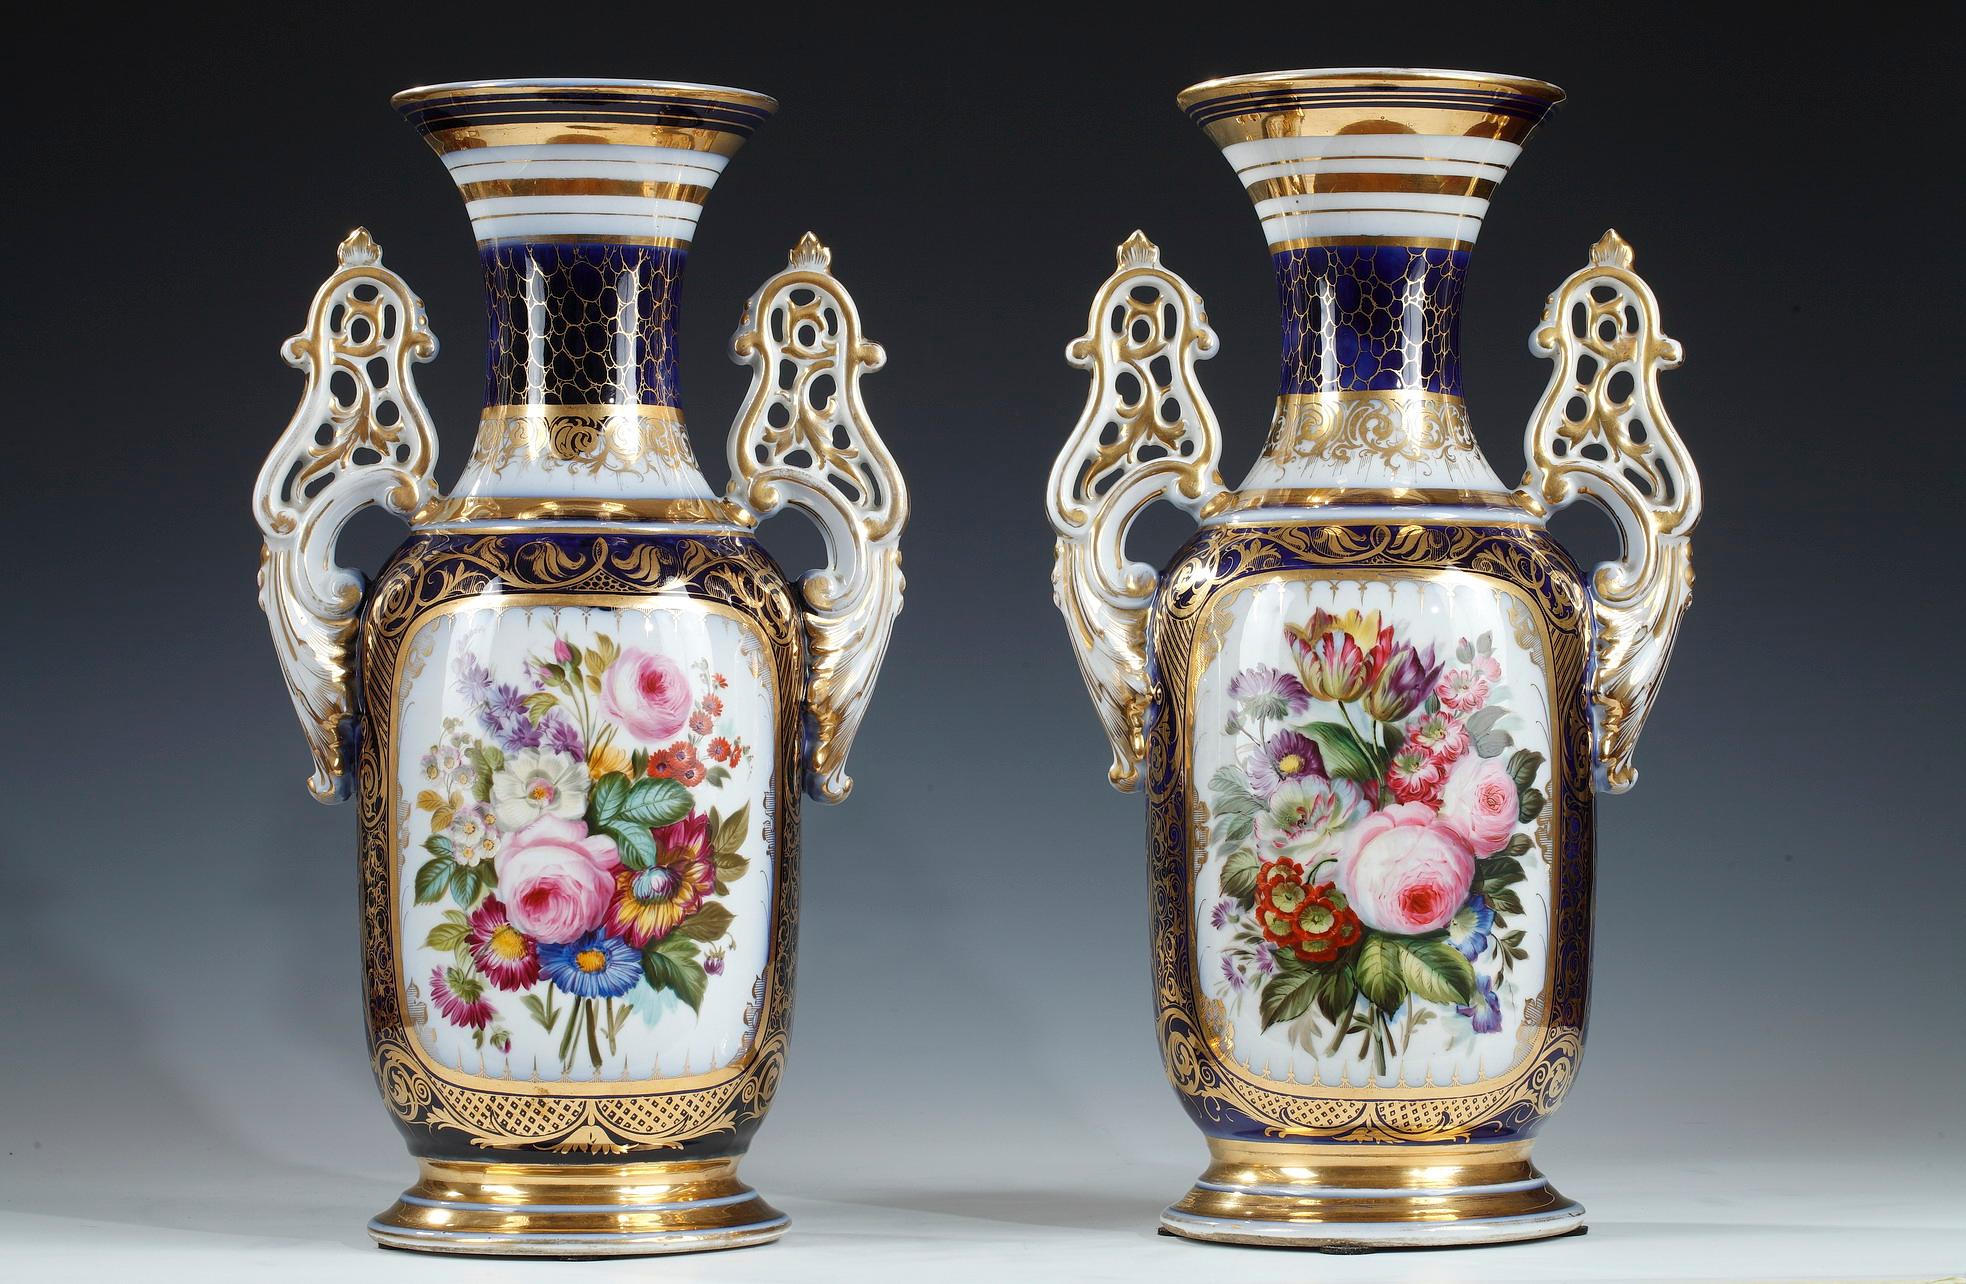 Charming pair of baluster shaped vases made in Valentine porcelain, with openwork handles enhanced with gold. They are decorated on the front with a polychrome bouquet of natural flowers in a cartouche with a golden interlacing frieze, and on the